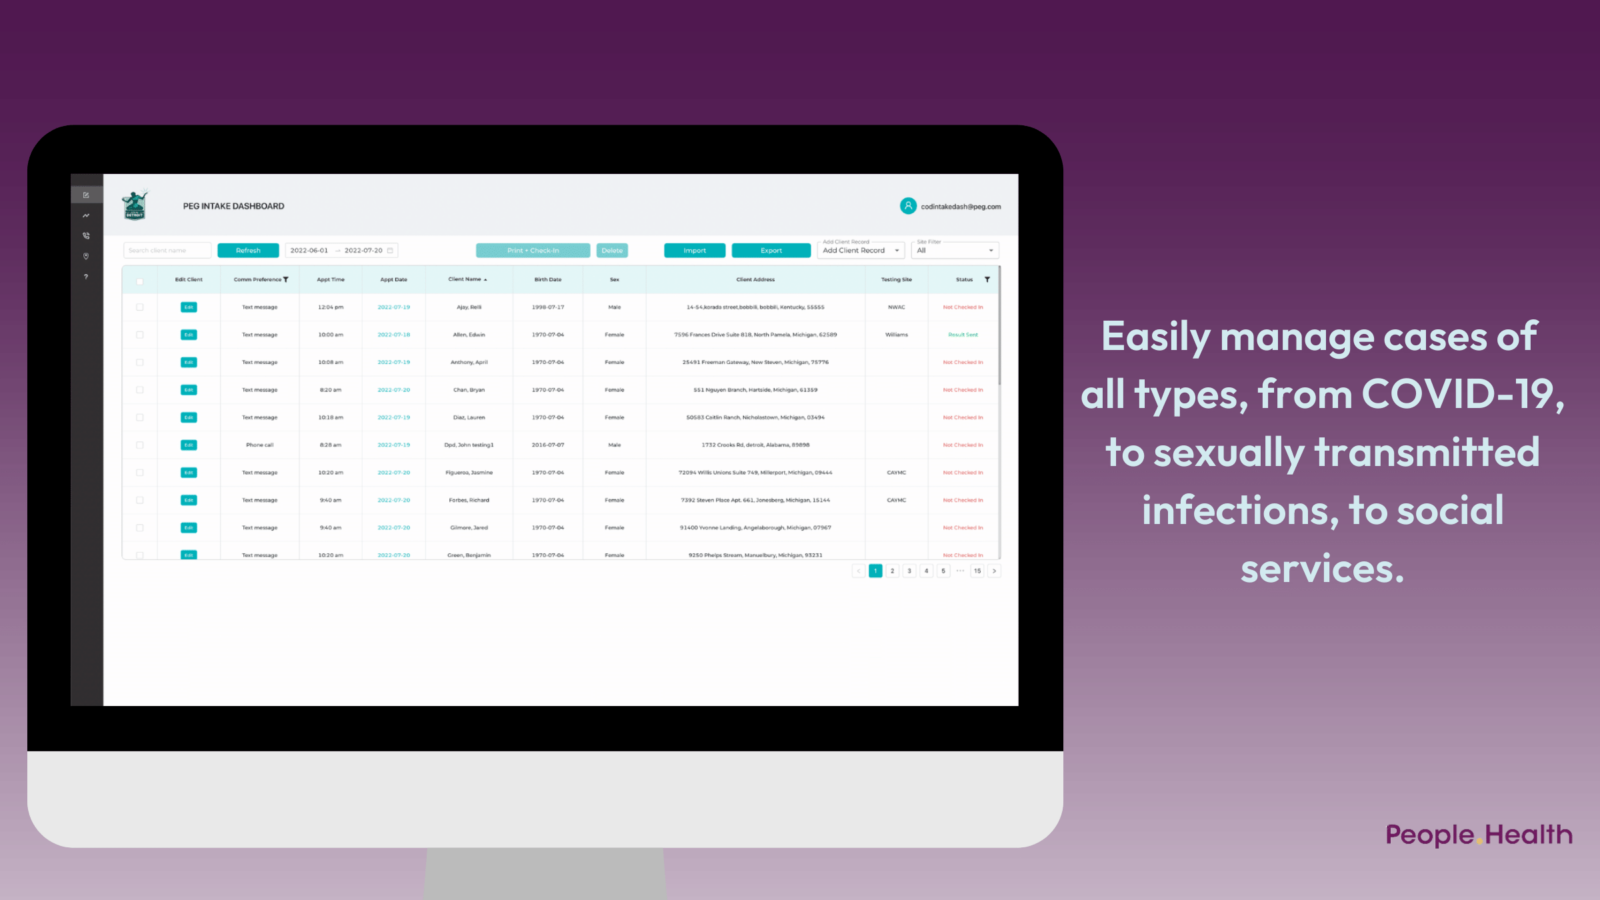 Easily manage cases of all types, from COVID-19, to sexually transmitted infections, to social services.